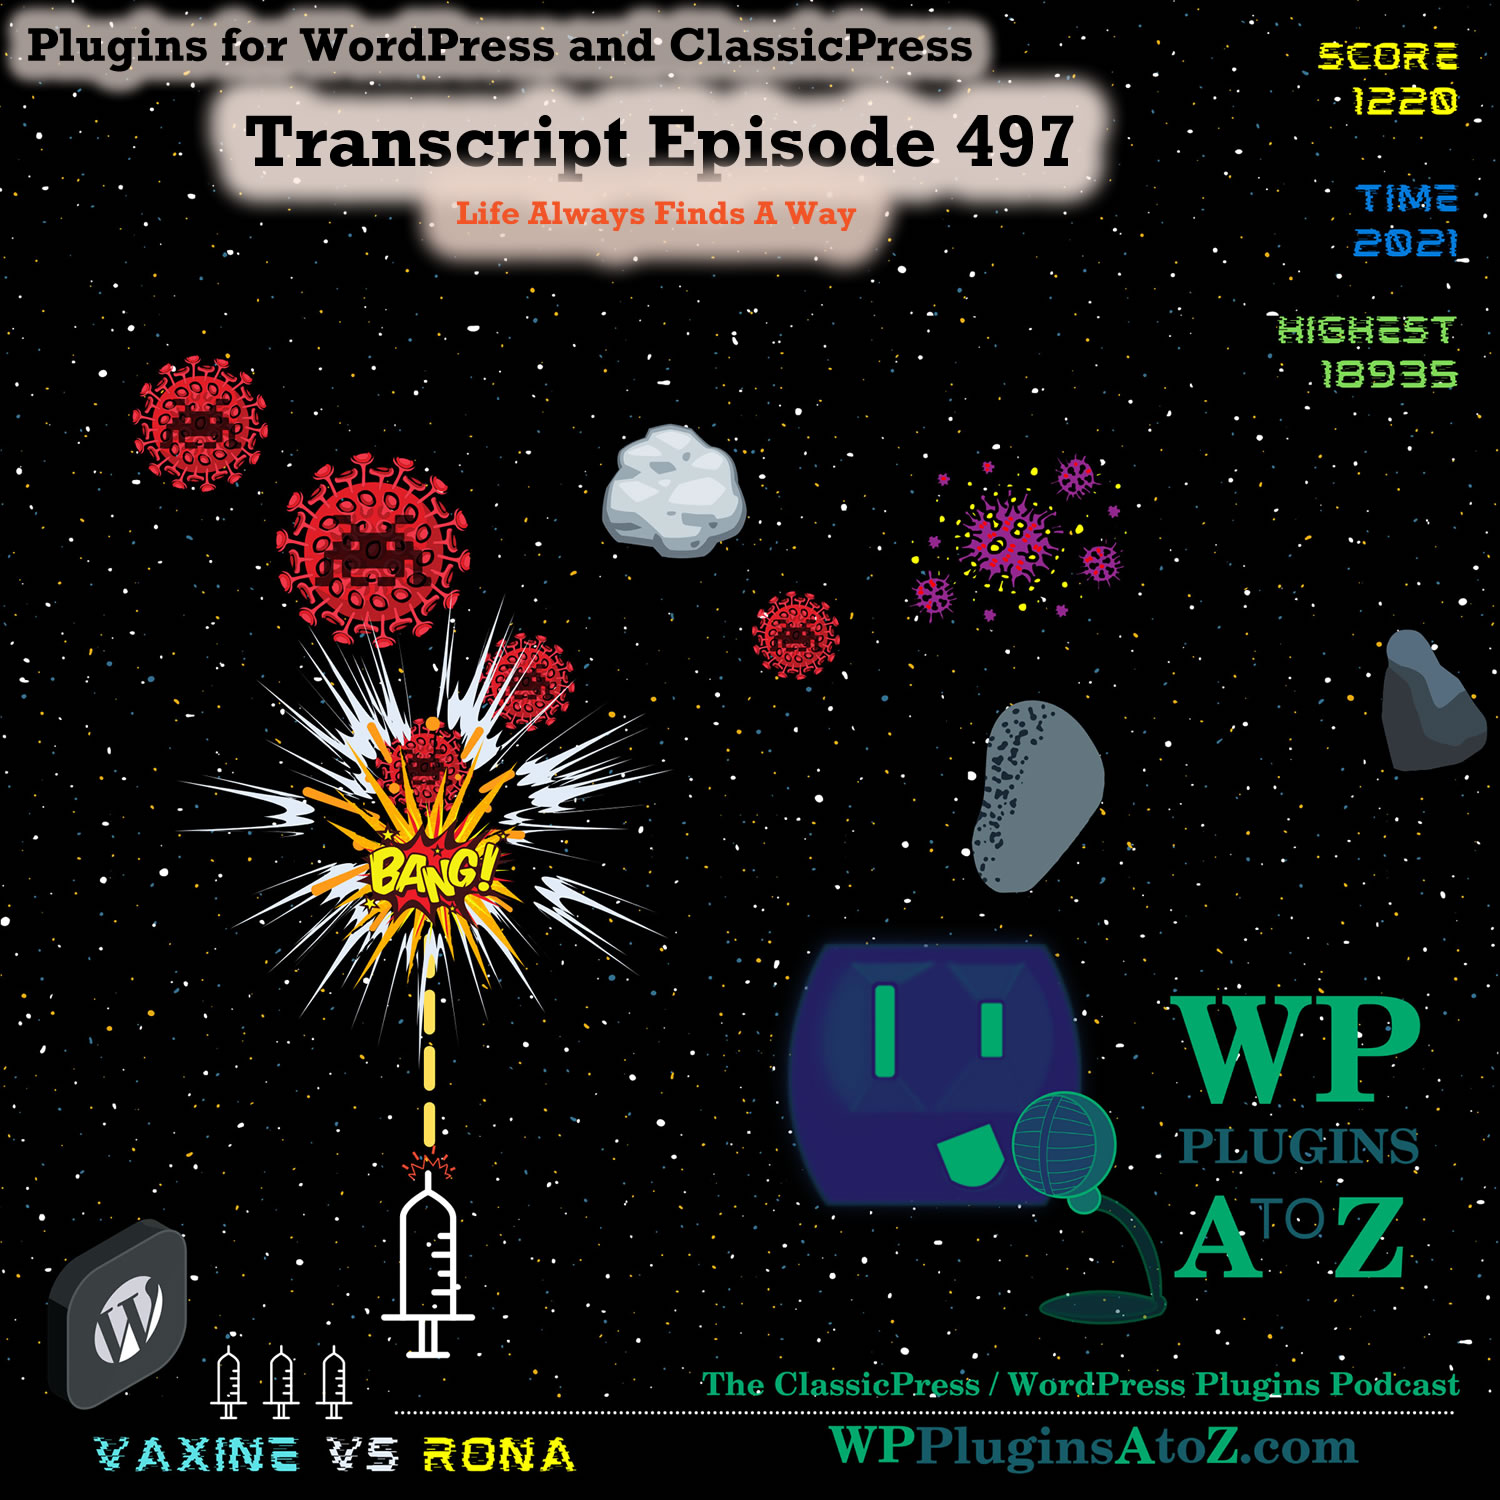 Life Always Finds A Way It's Episode 497 - We have plugins for Finding Your Way, Reaching Out, Making Copies, Market Place..., and ClassicPress Options. It's all coming up on WordPress Plugins A-Z!